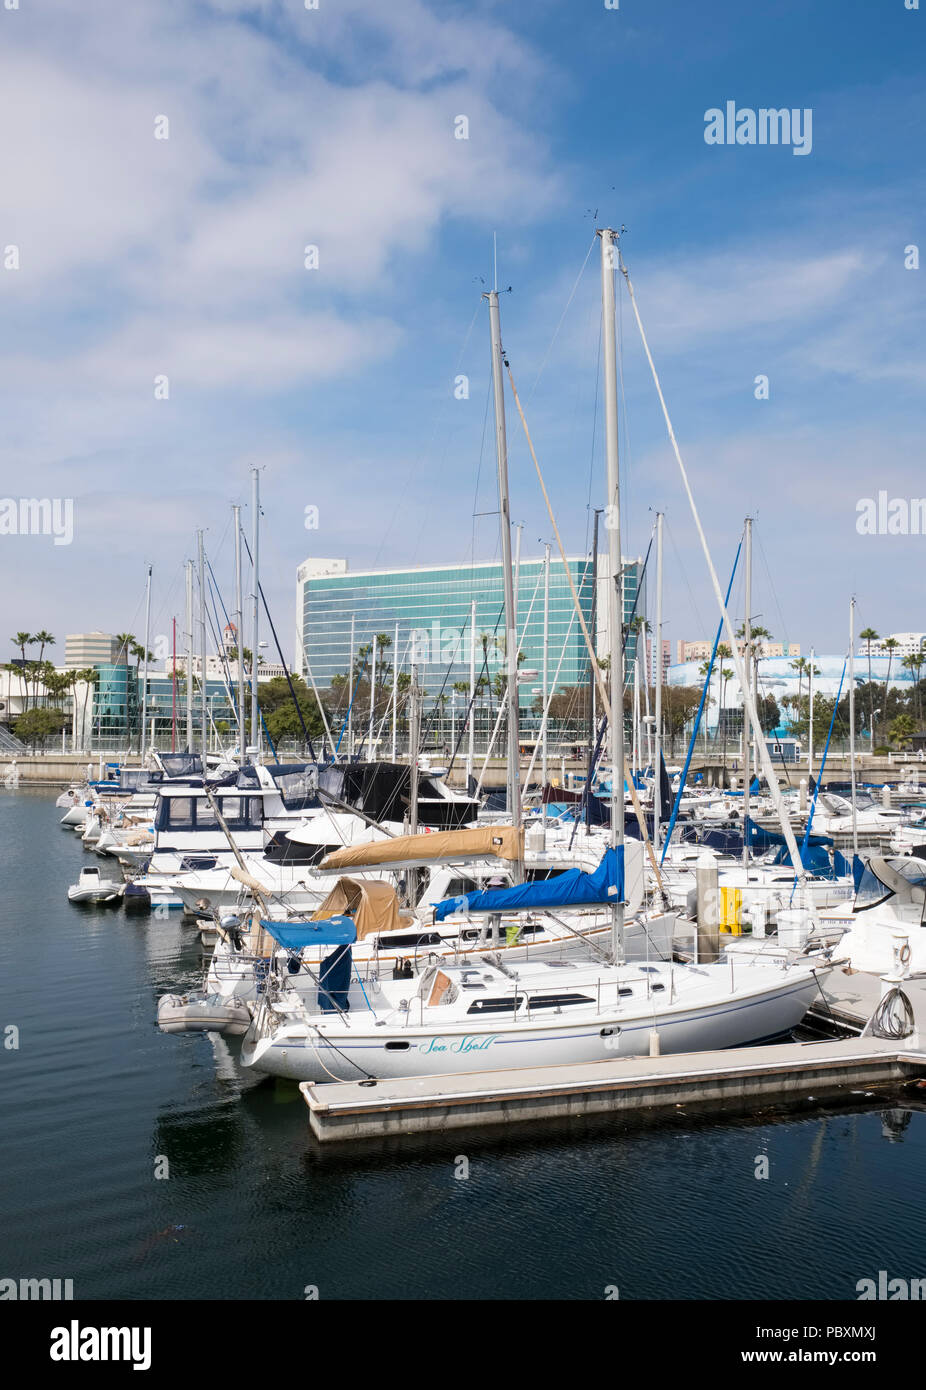 Boats and yachts in the harbour at Long Beach, California, CA, USA Stock Photo